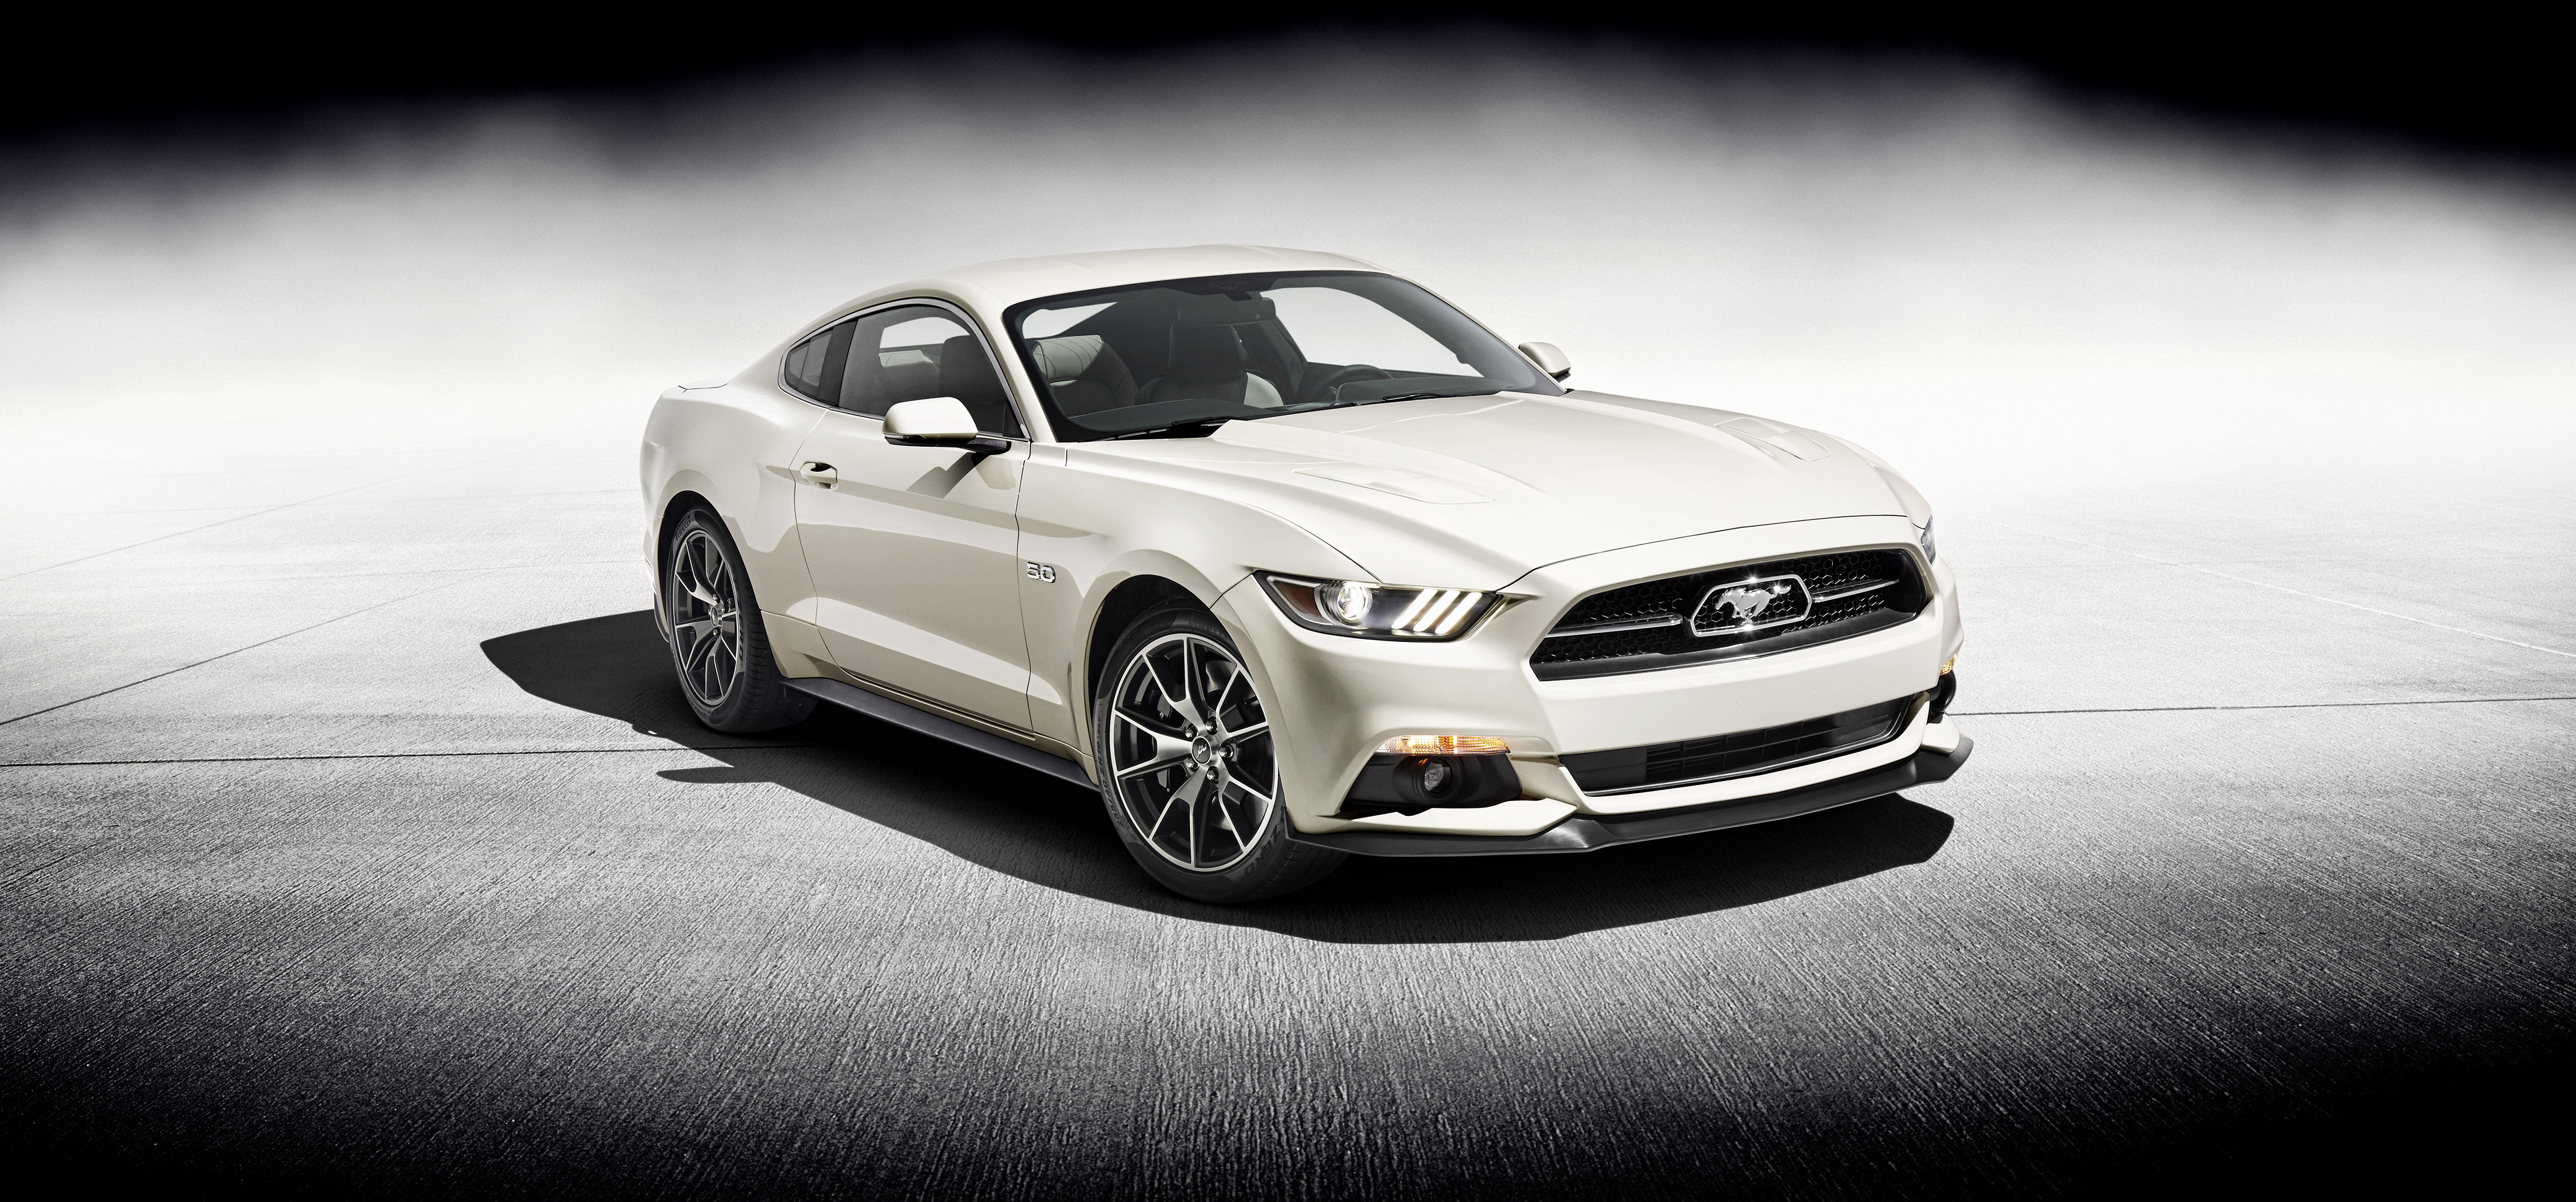 2015 Mustang 50 Year Limited Edition Photos and Details